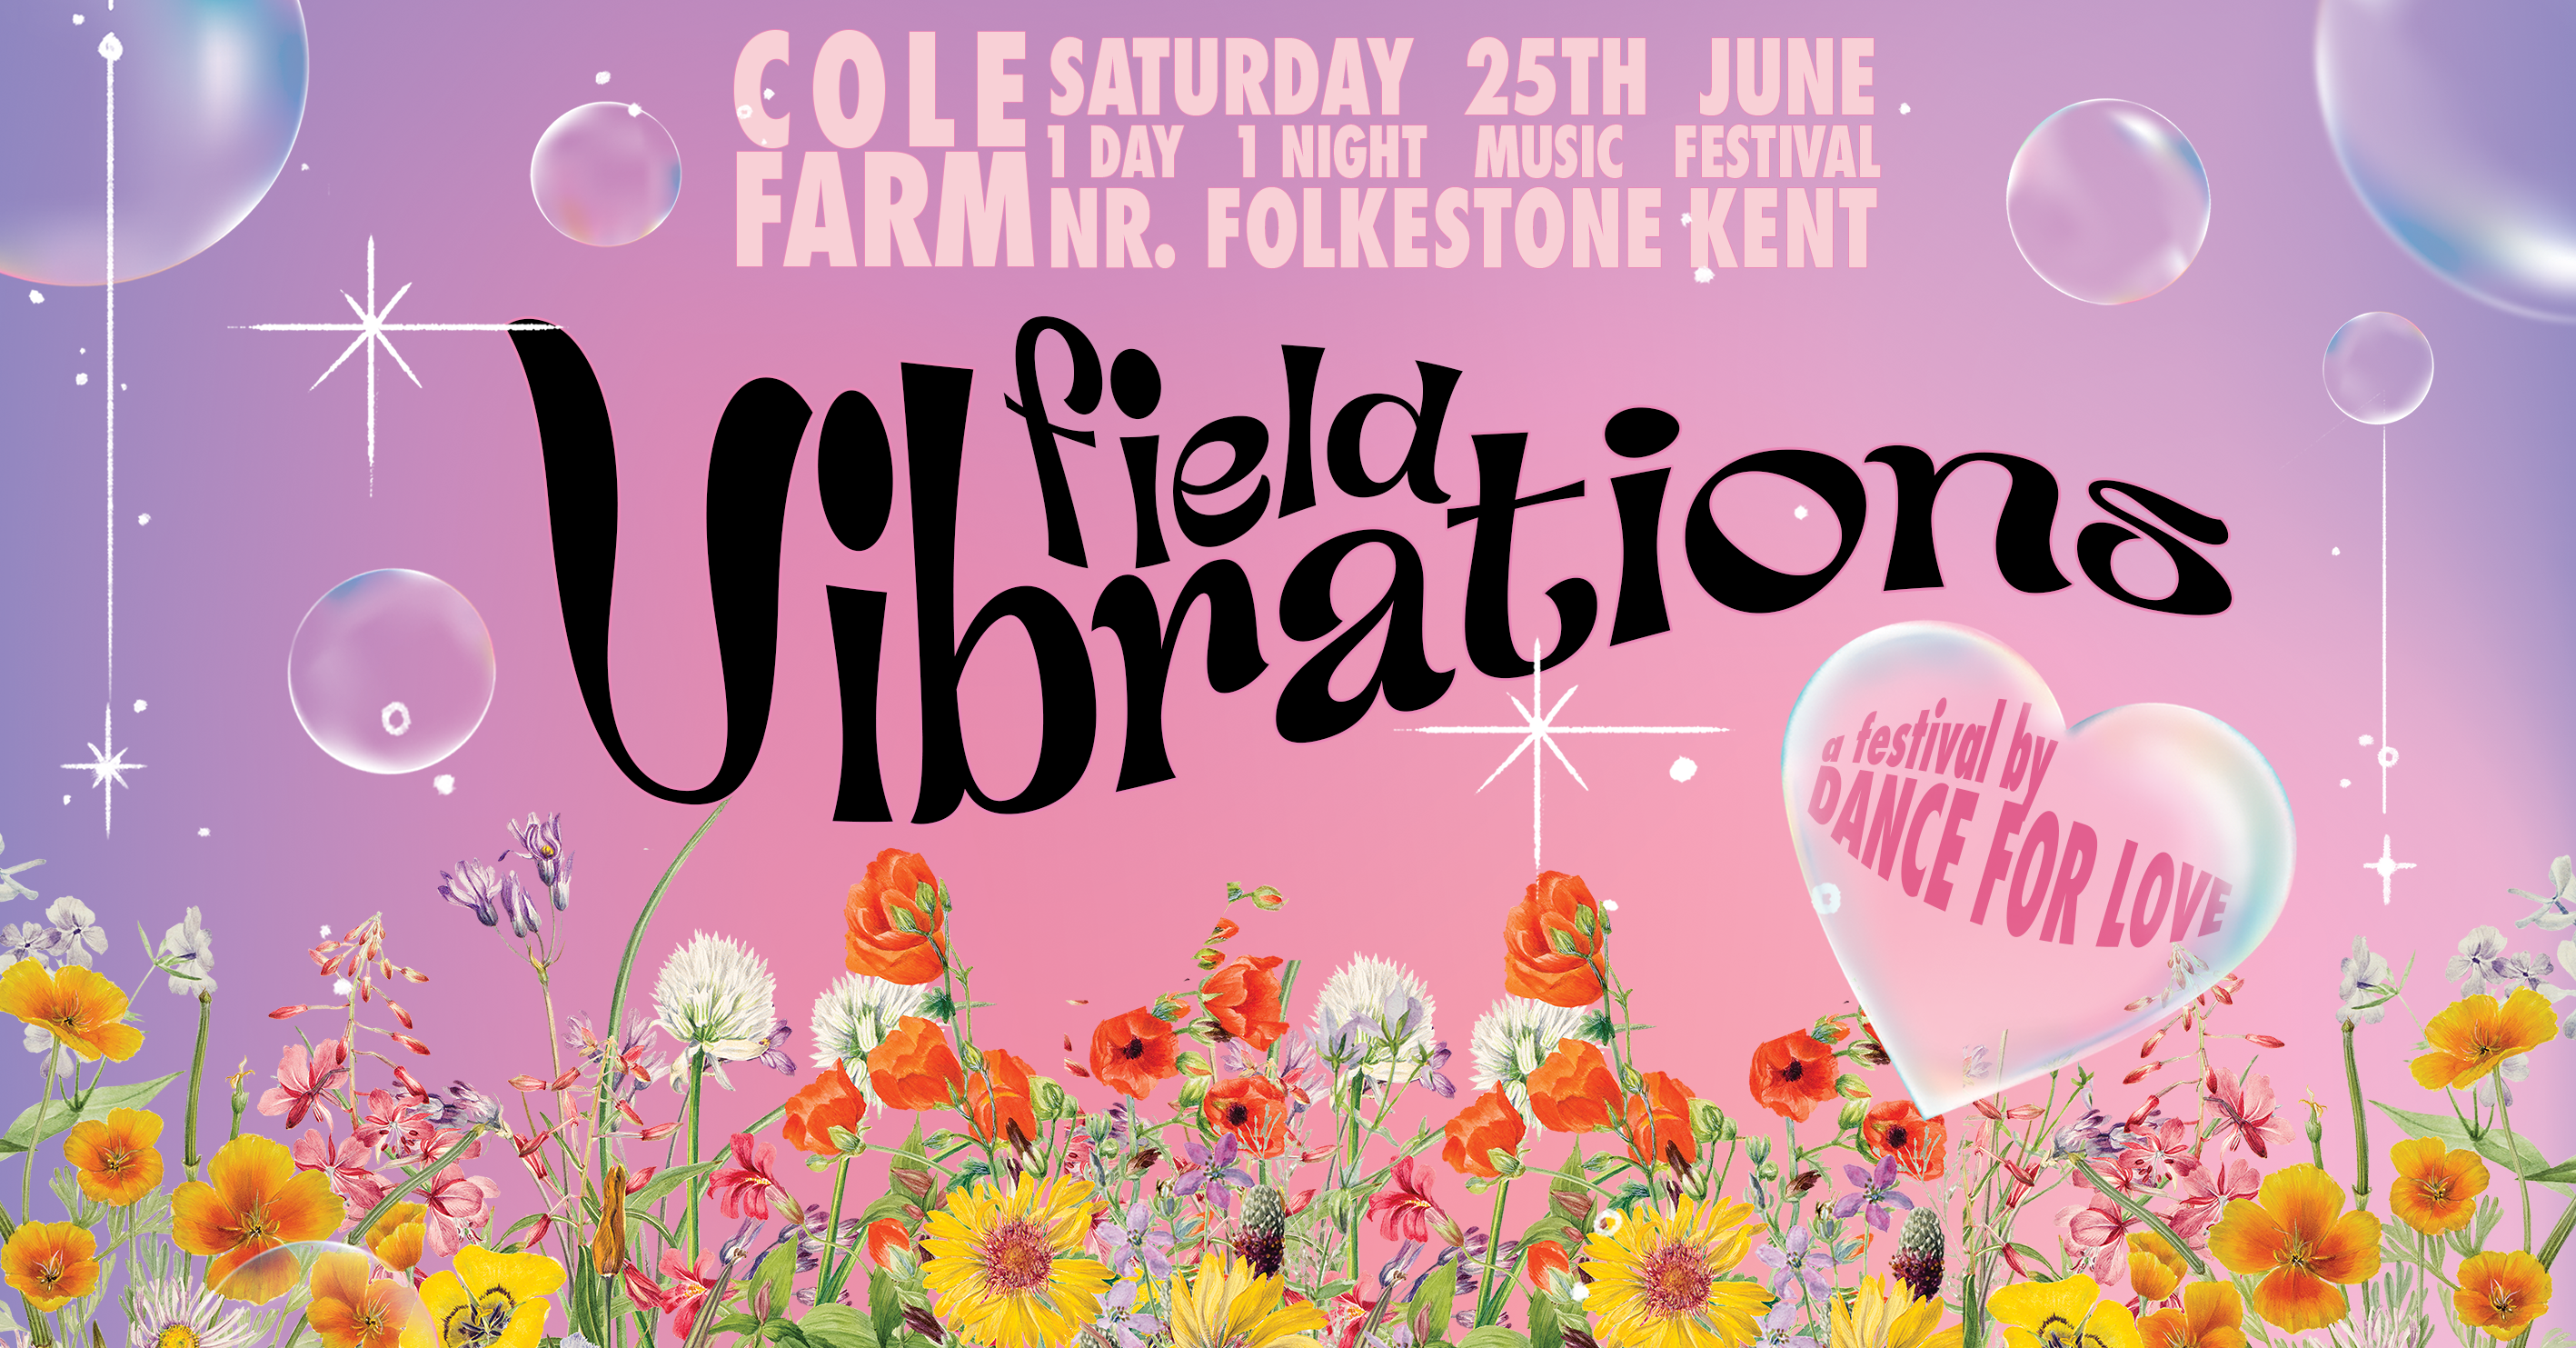 Field Vibrations - A Festival By Dance For Love at TBA - Cole Farm,  Paddlesworth, Nr. Folkestone, Kent, South + East